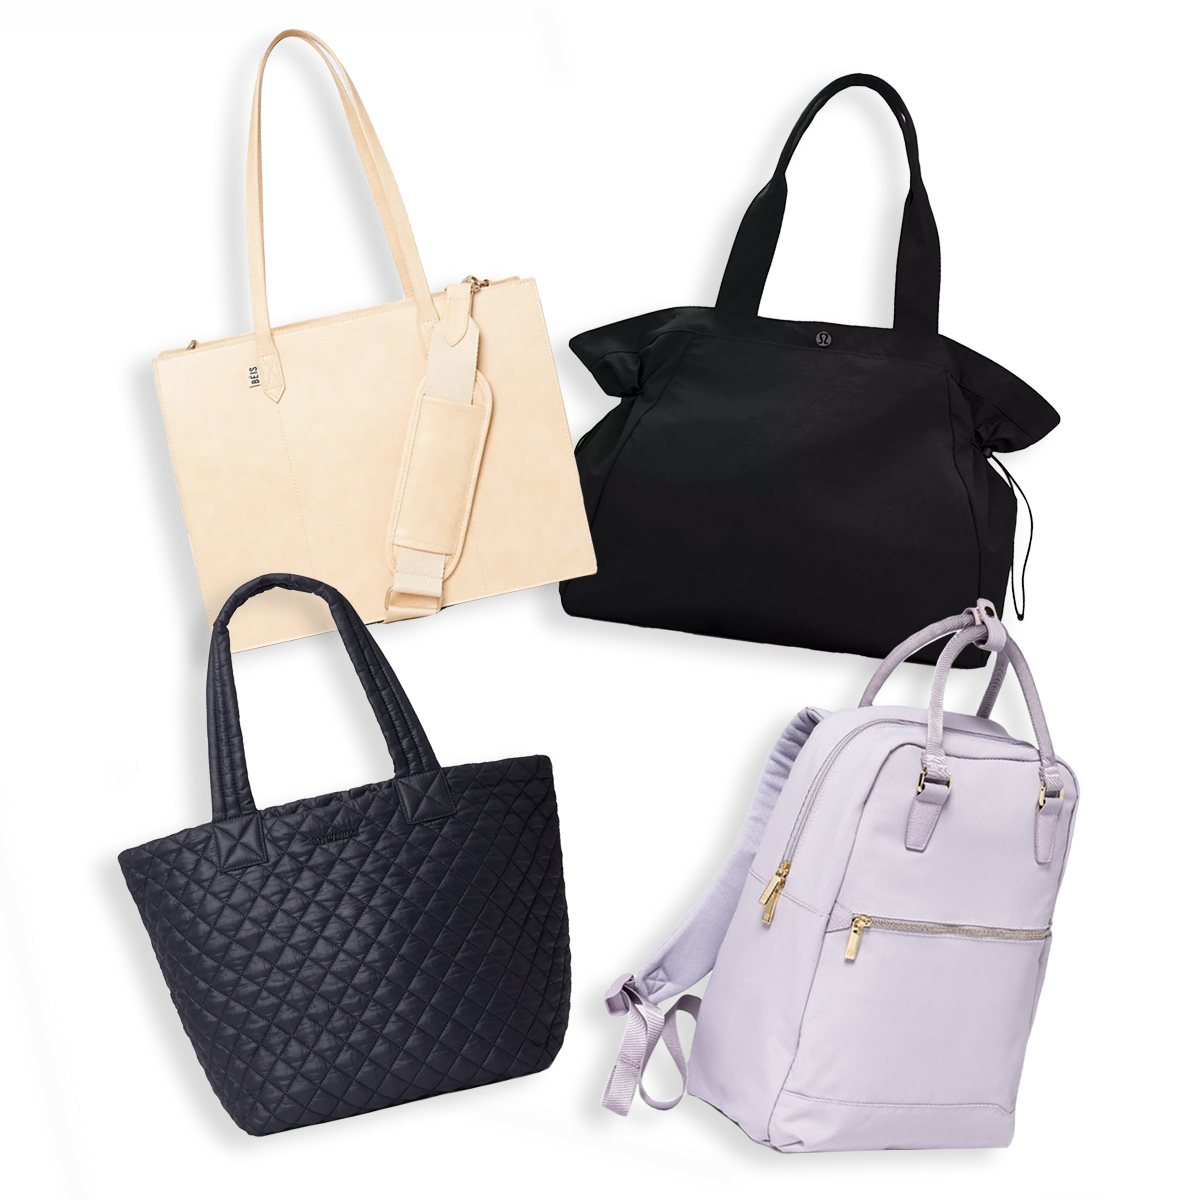 Chic Back to School Bags That Will Fit Your Laptop